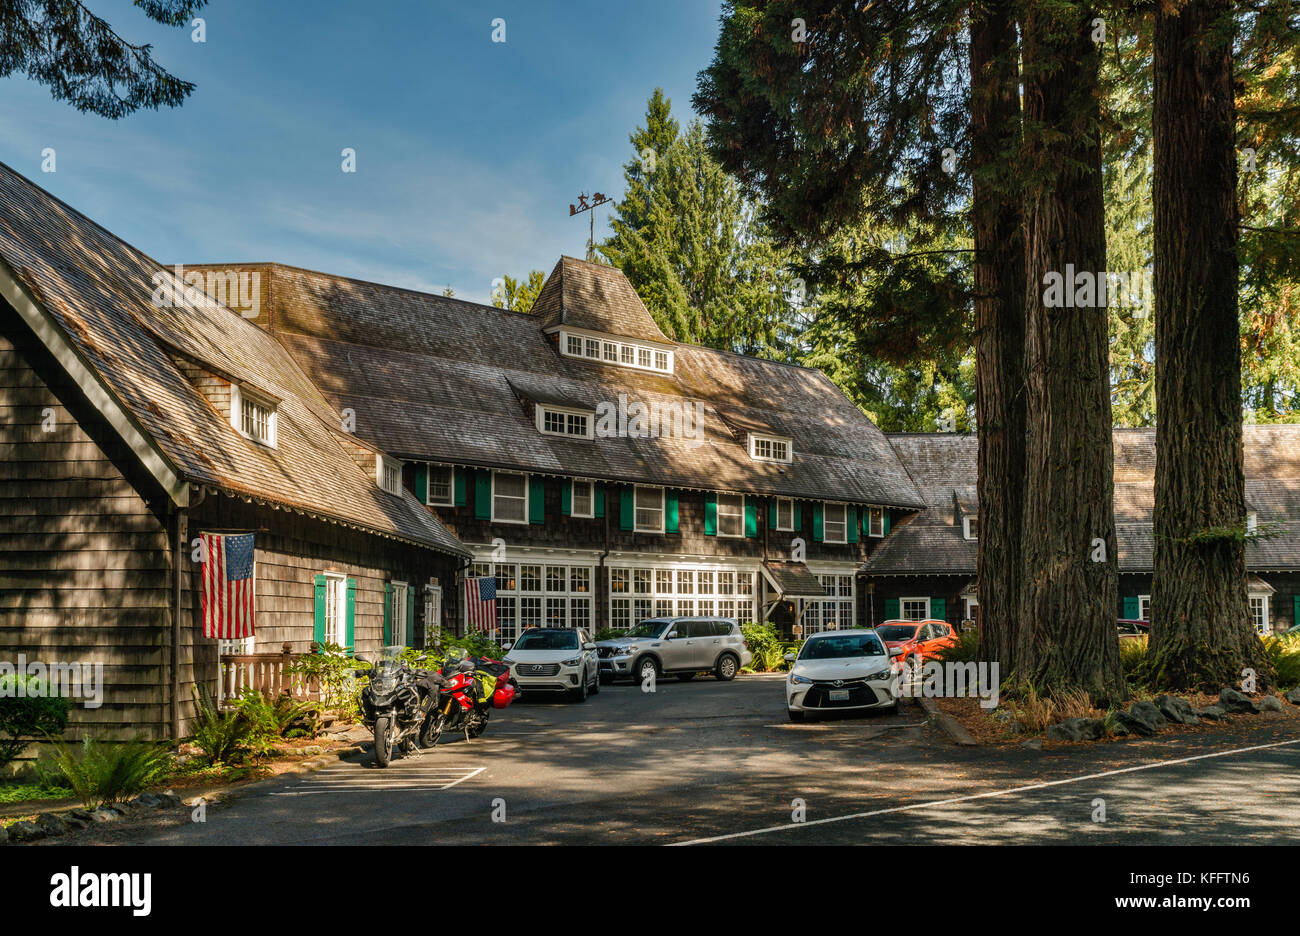 Lake Quinault Lodge, Quinault Valley, Olympic National Forest, Washington state, USA Stock Photo